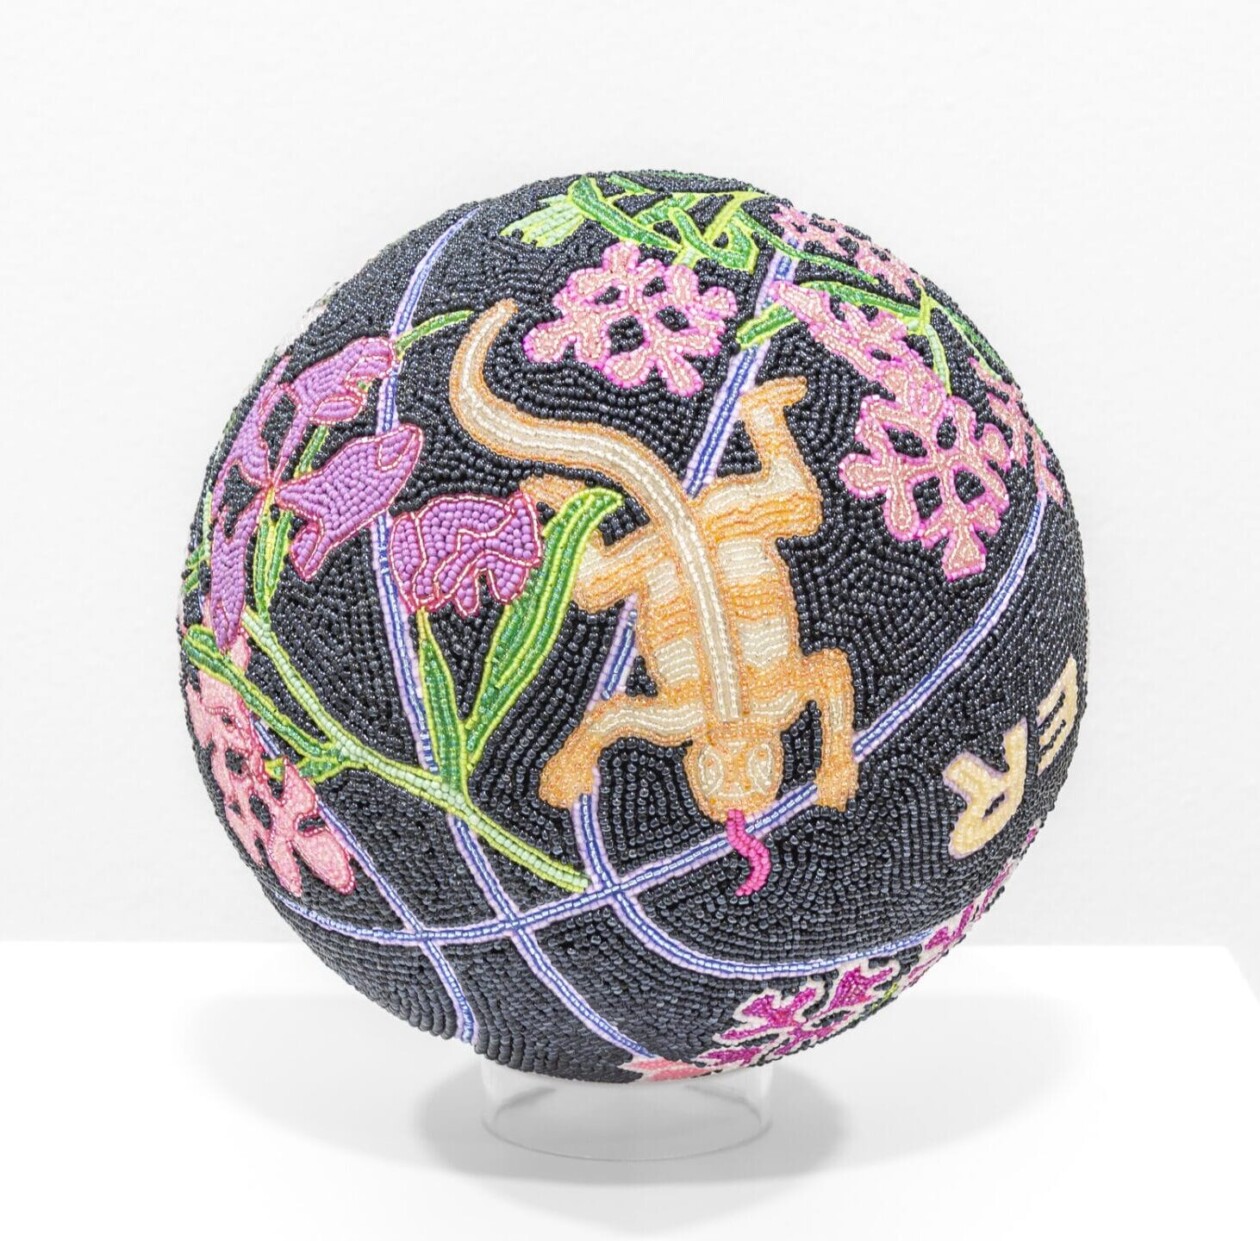 From Playground To Prophecy, Jorge Mañes Rubio's Beaded Basketball Sculptures (13)